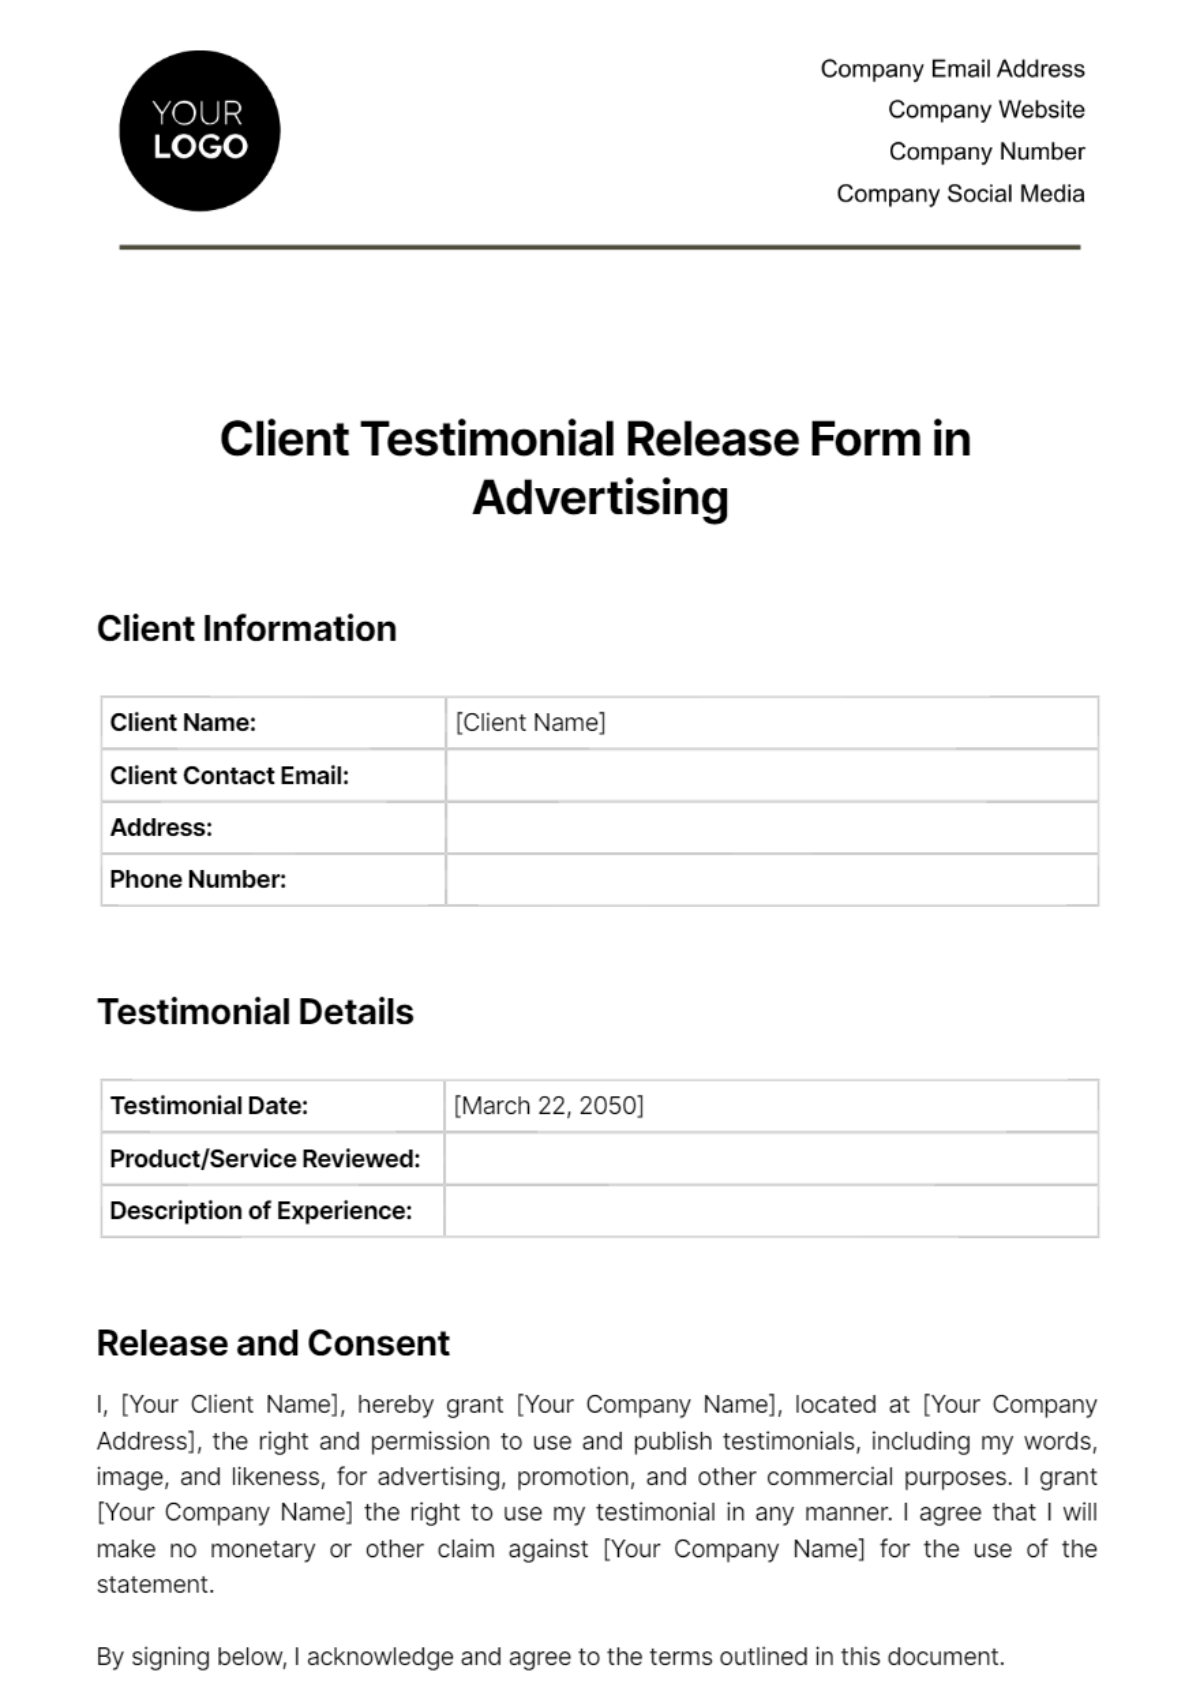 Free Client Testimonial Release Form in Advertising Template